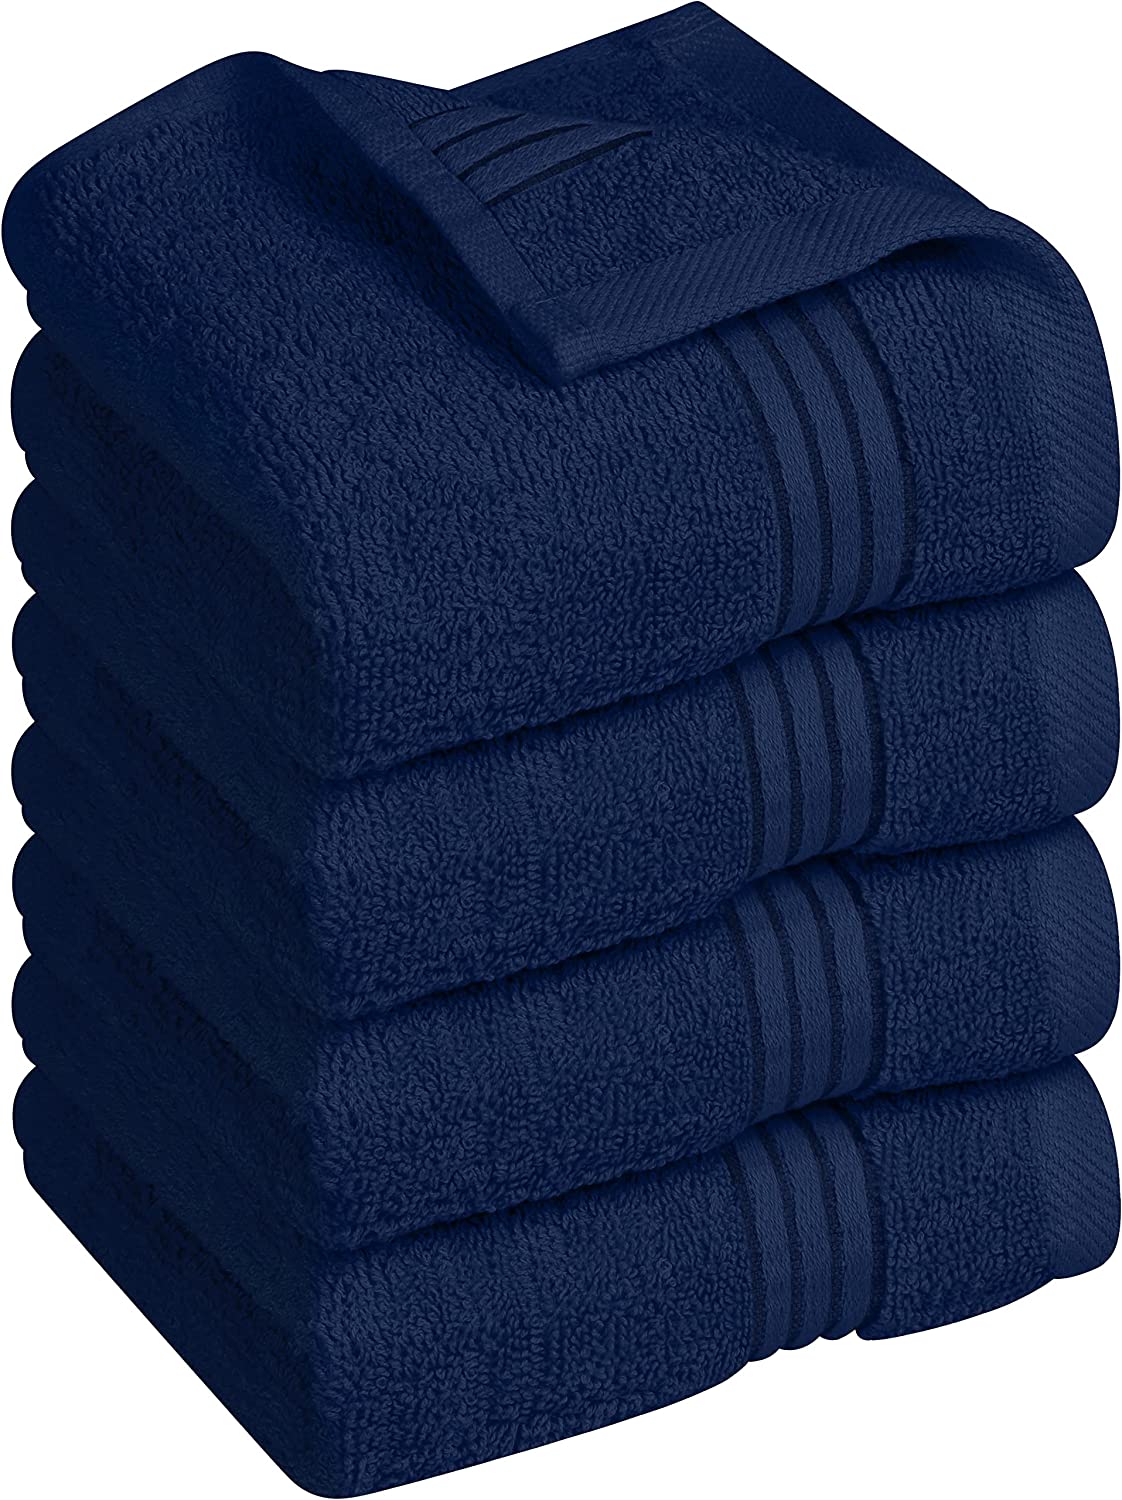  Utopia Towels Dish Towels, 15 x 25 Inches, 100% Ring Spun  Cotton Super Absorbent Linen Kitchen Towels, Soft Reusable Cleaning Bar and  Tea Towels Set (12 Pack, Blue) : Home & Kitchen